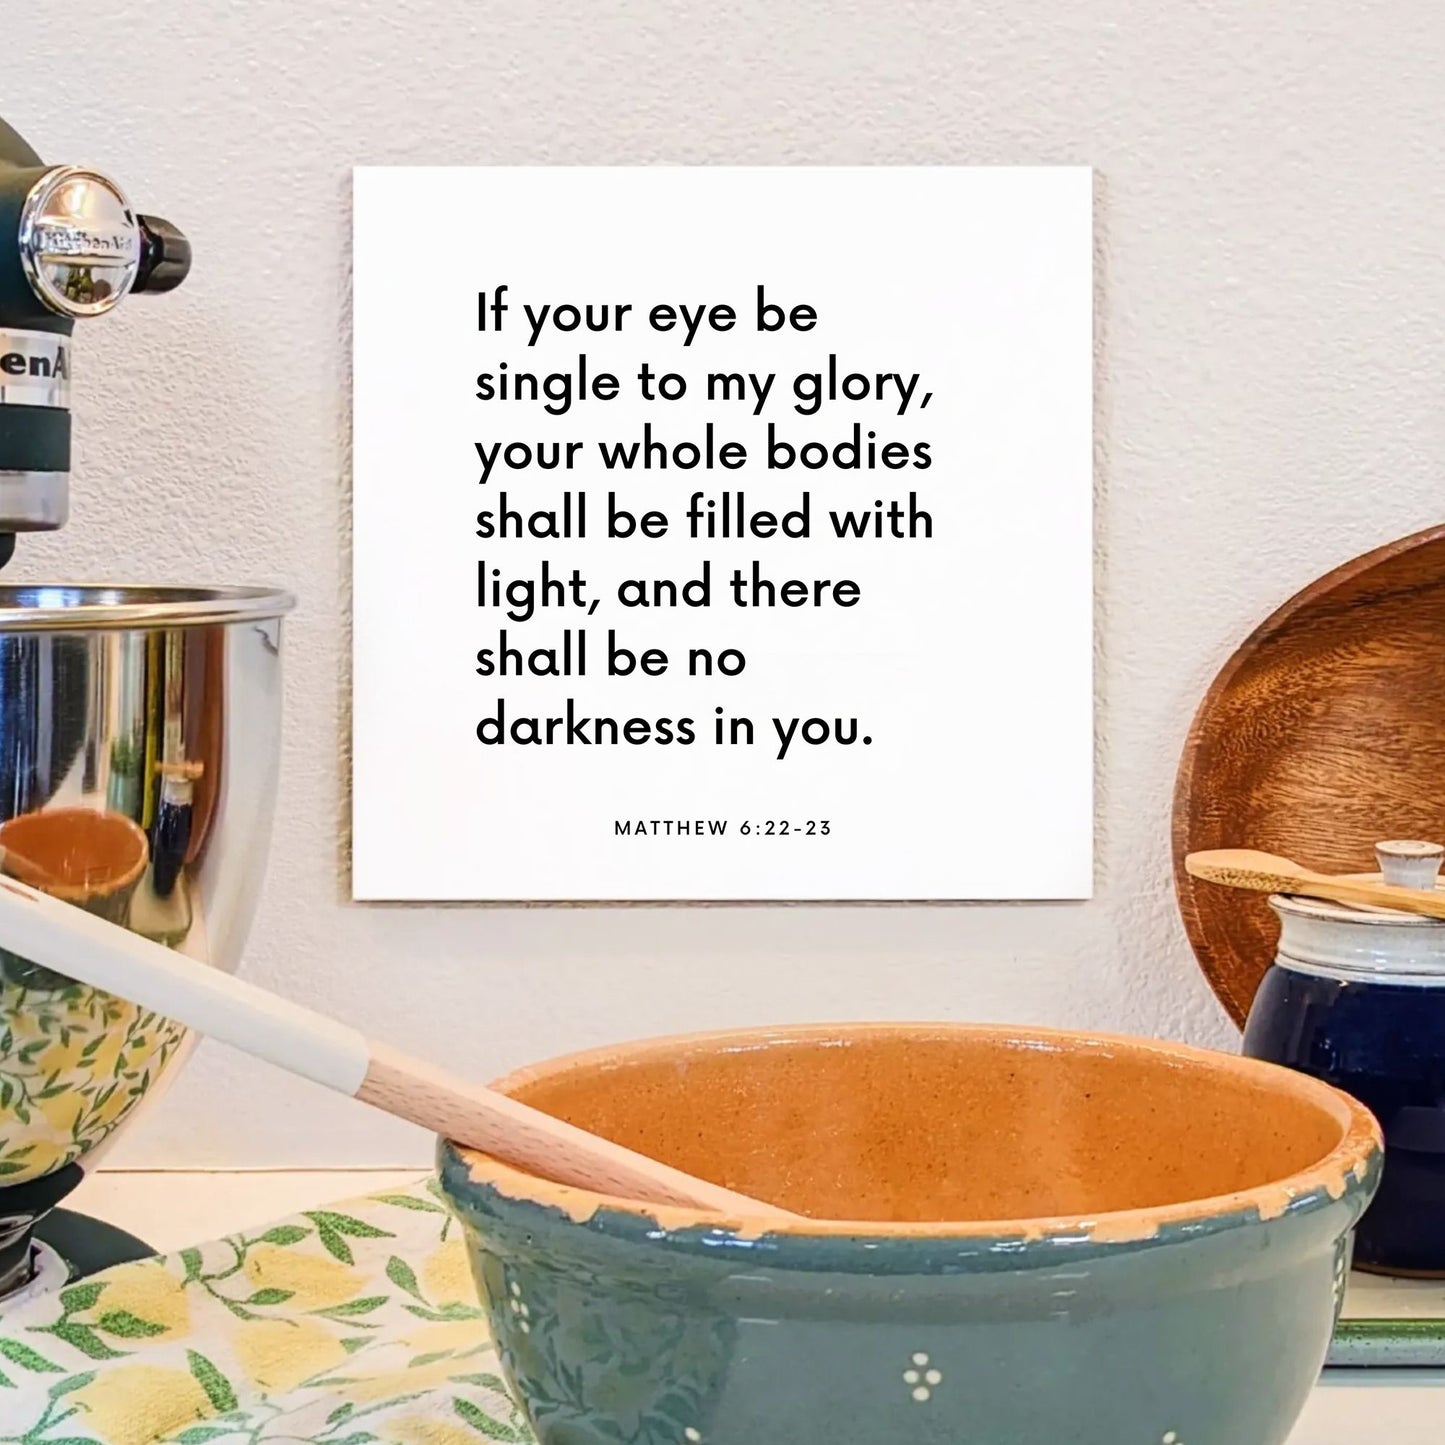 Kitchen mouting of the scripture tile for Matthew 6:22-23 - "If your eye be single to my glory"